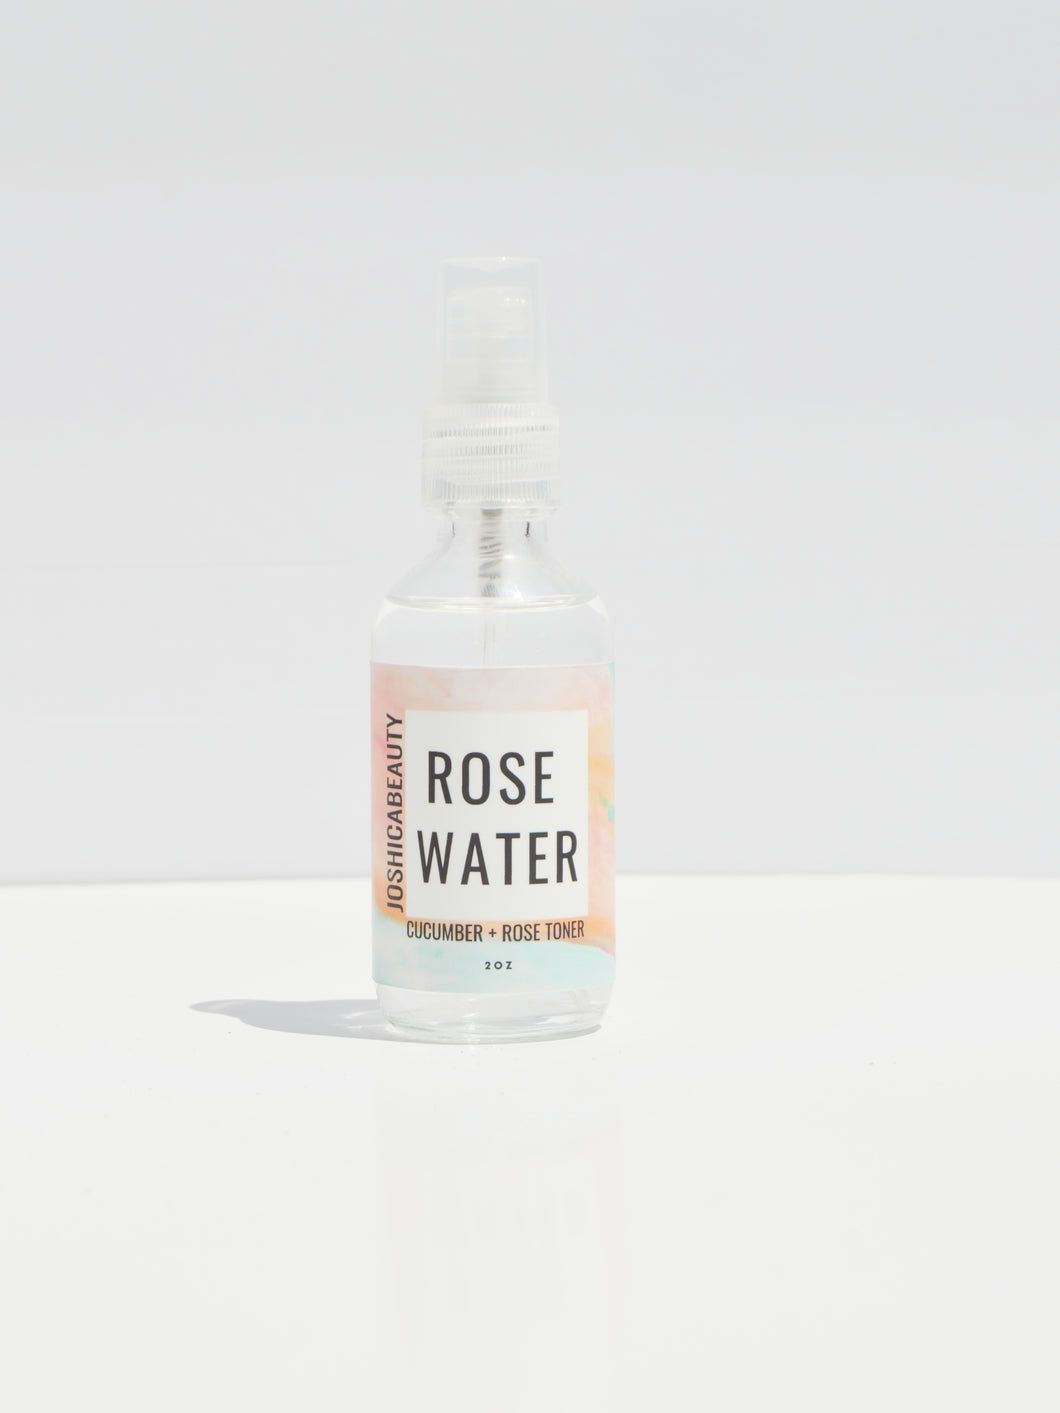 Rosewater Botanical Facial and Body Mist